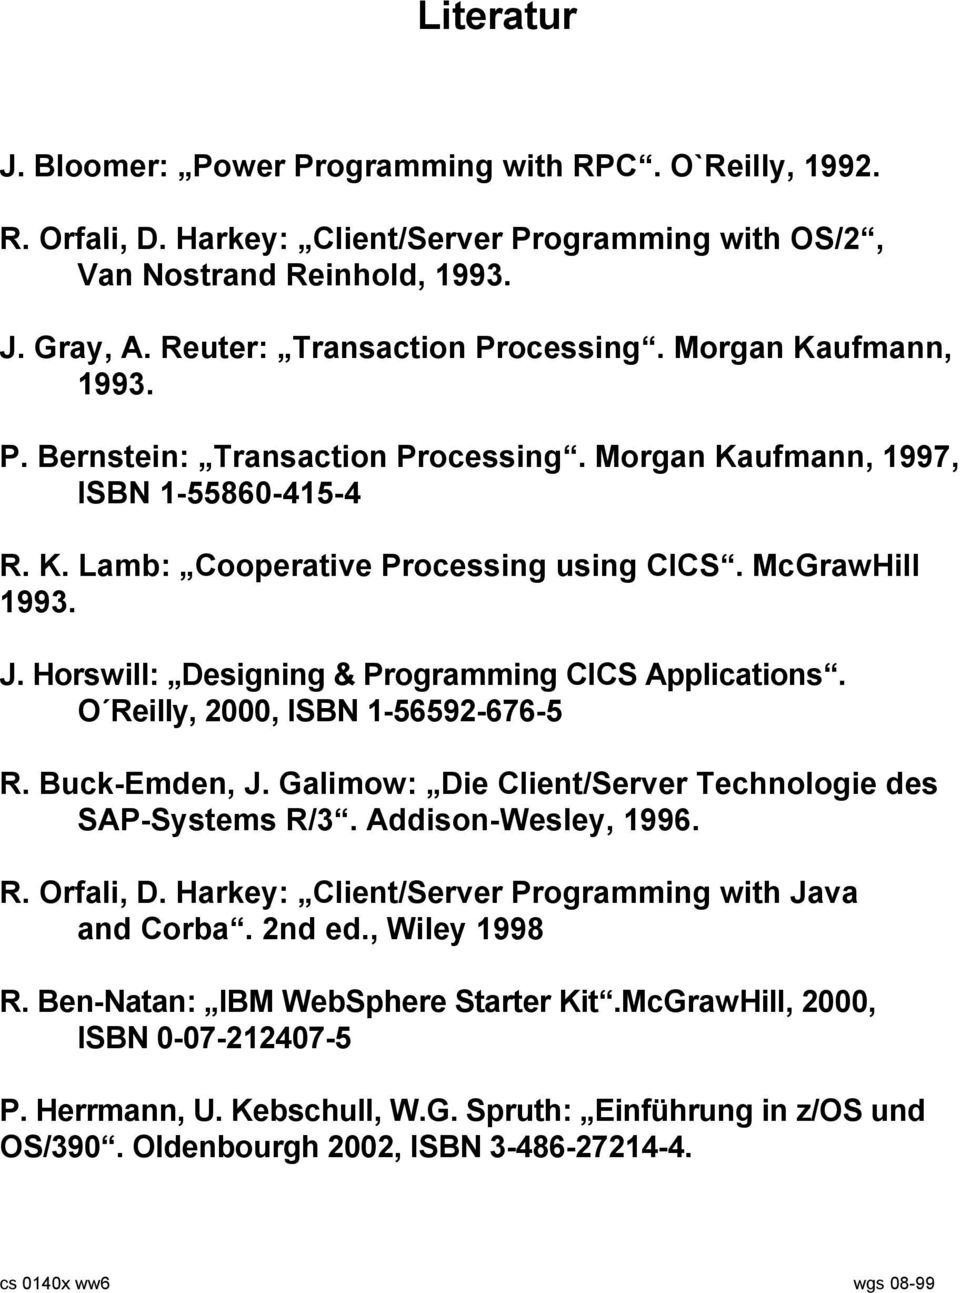 Horswill: Designing & Programming CICS Applications. O Reilly, 2000, ISBN 1-56592-676-5 R. Buck-Emden, J. Galimow: Die Client/Server Technologie des SAP-Systems R/3. Addison-Wesley, 1996. R. Orfali, D.